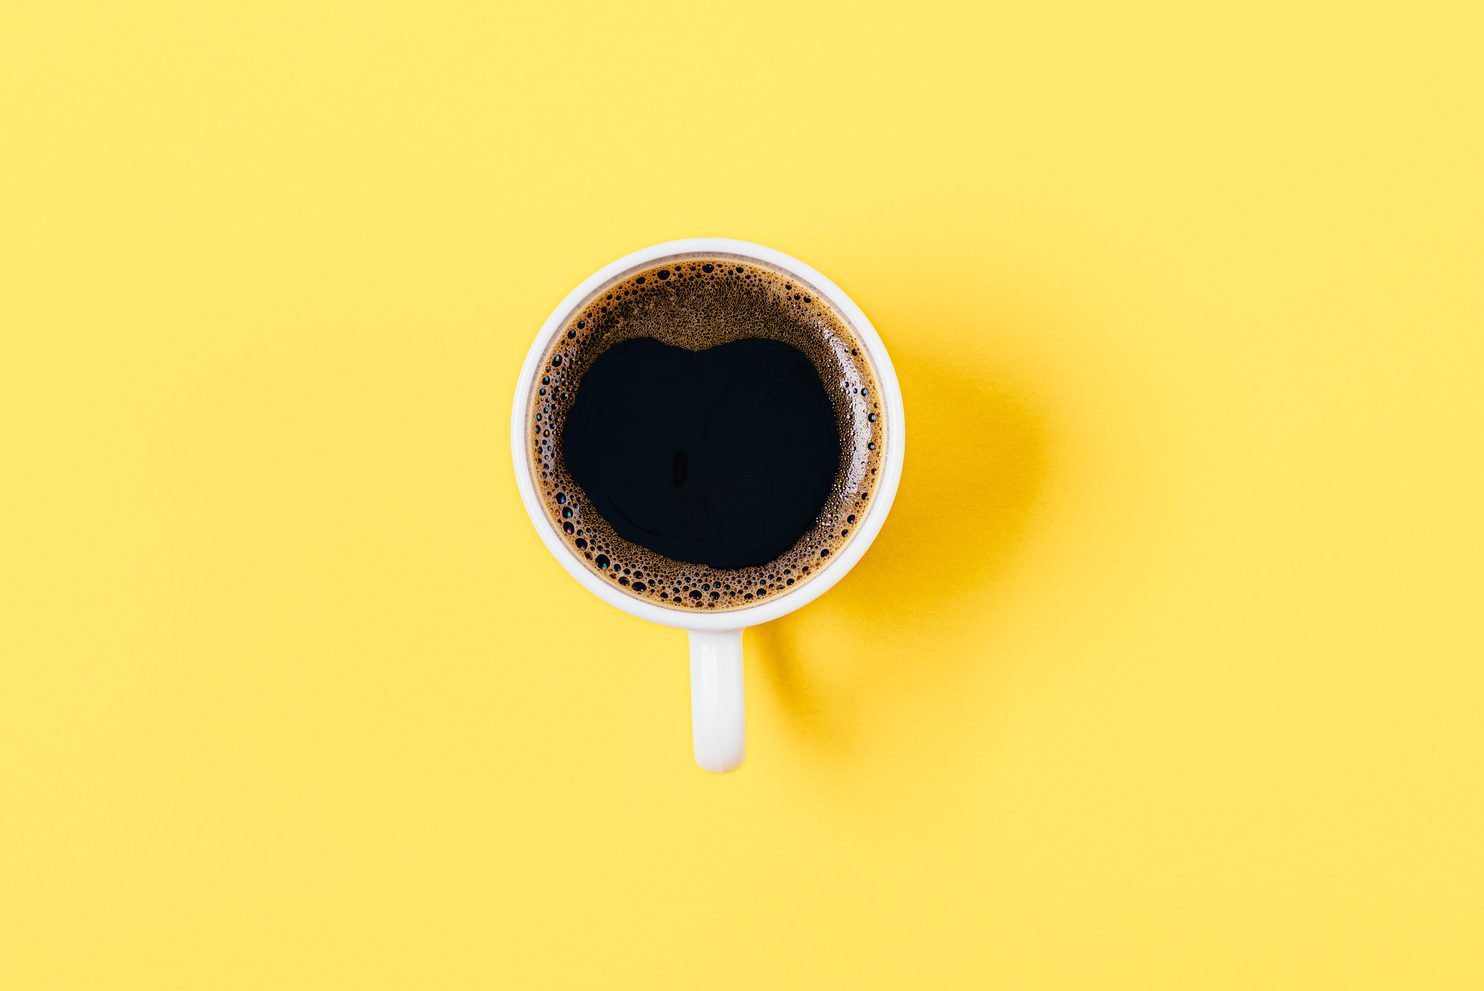 One coffee cup in center of bright yellow background